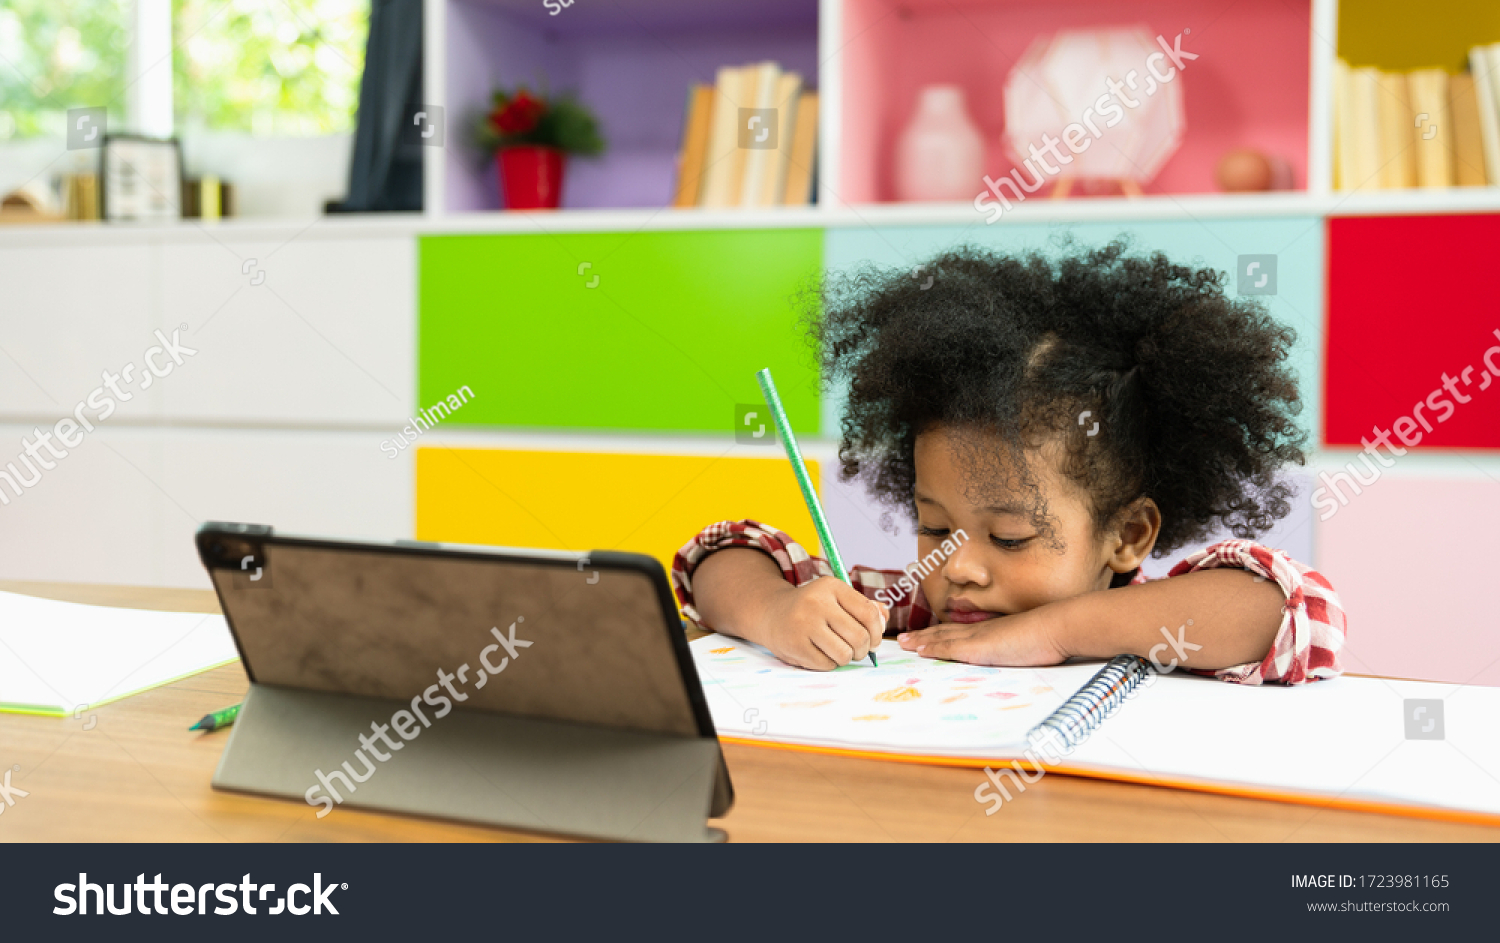 Young African American kid girl studying using digital tablet, preschool child study at home school. Children education, self isolation, coronavirus outbreak social distancing or homeschooling concept #1723981165